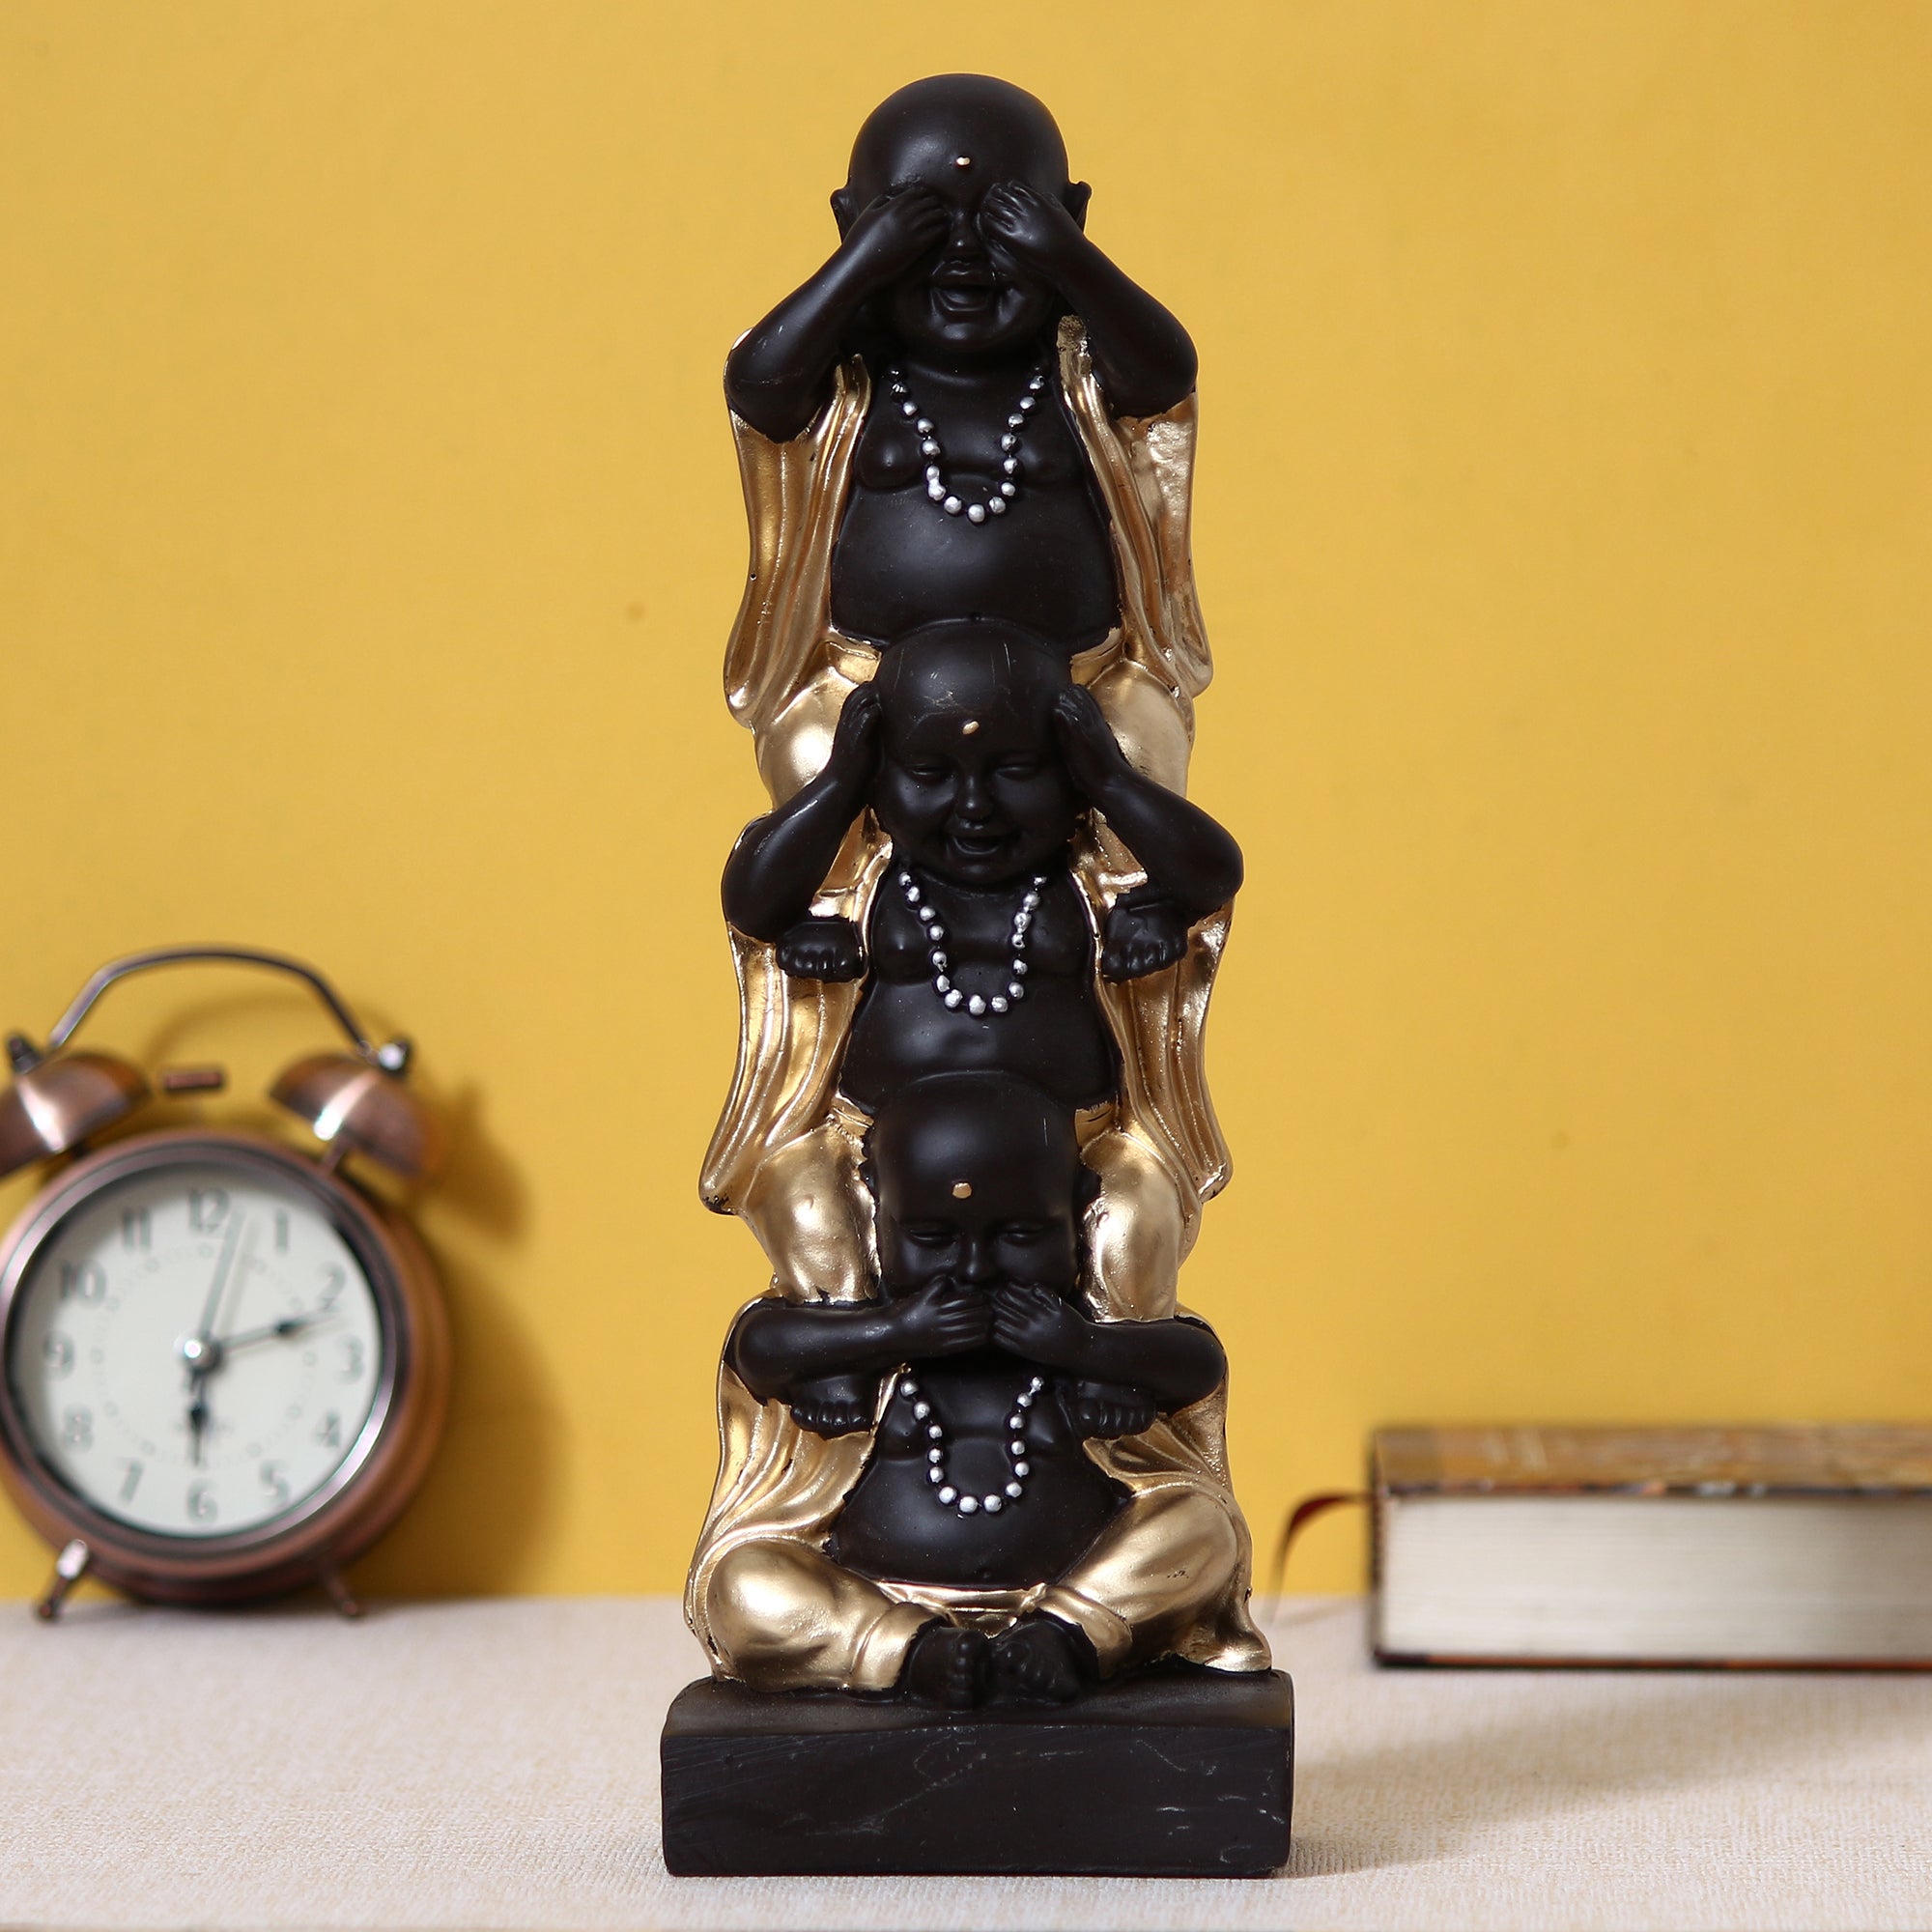 Polyresin Black and Golden Set of 3 Laughing Buddha Statue Standing on each other Decorative Showpiece